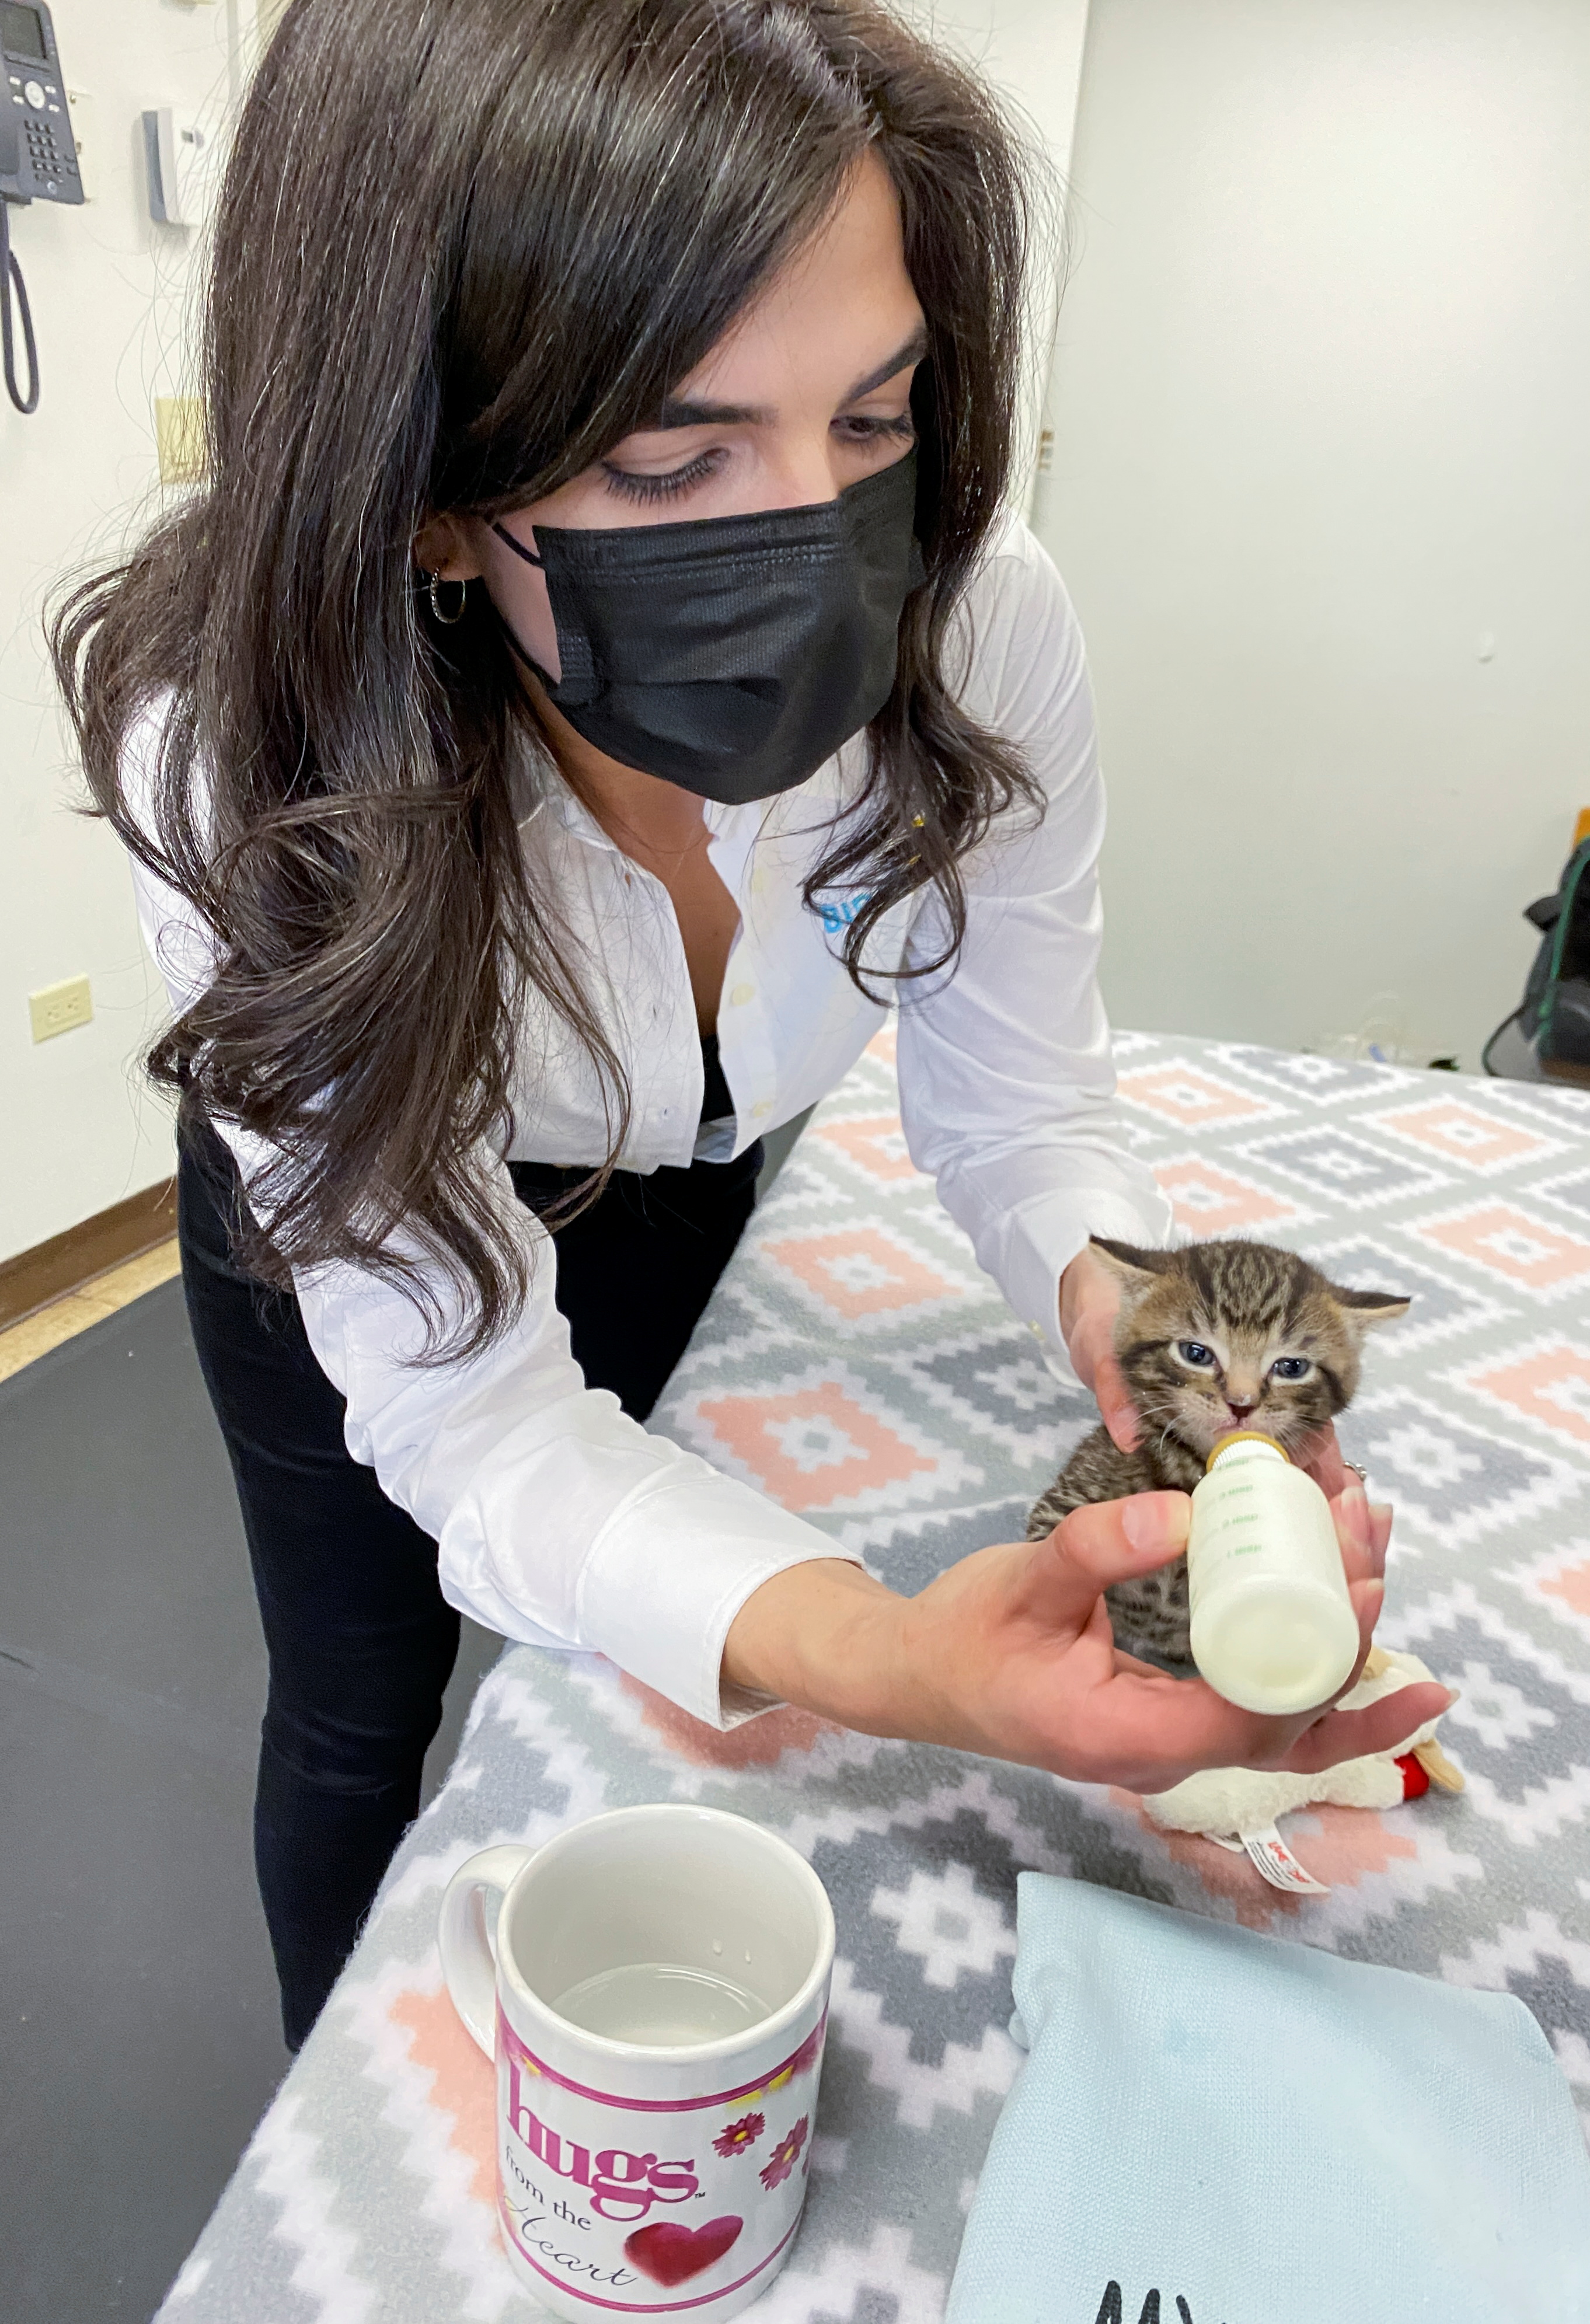 Director of Strategy for Leadership Giving in the Feral Cat Initiative, Elyise Hallenbeck, bottle feeds a 4-week-old kitten, in New York City, New York, U.S., April 30, 2021. REUTERS/Roselle Chen